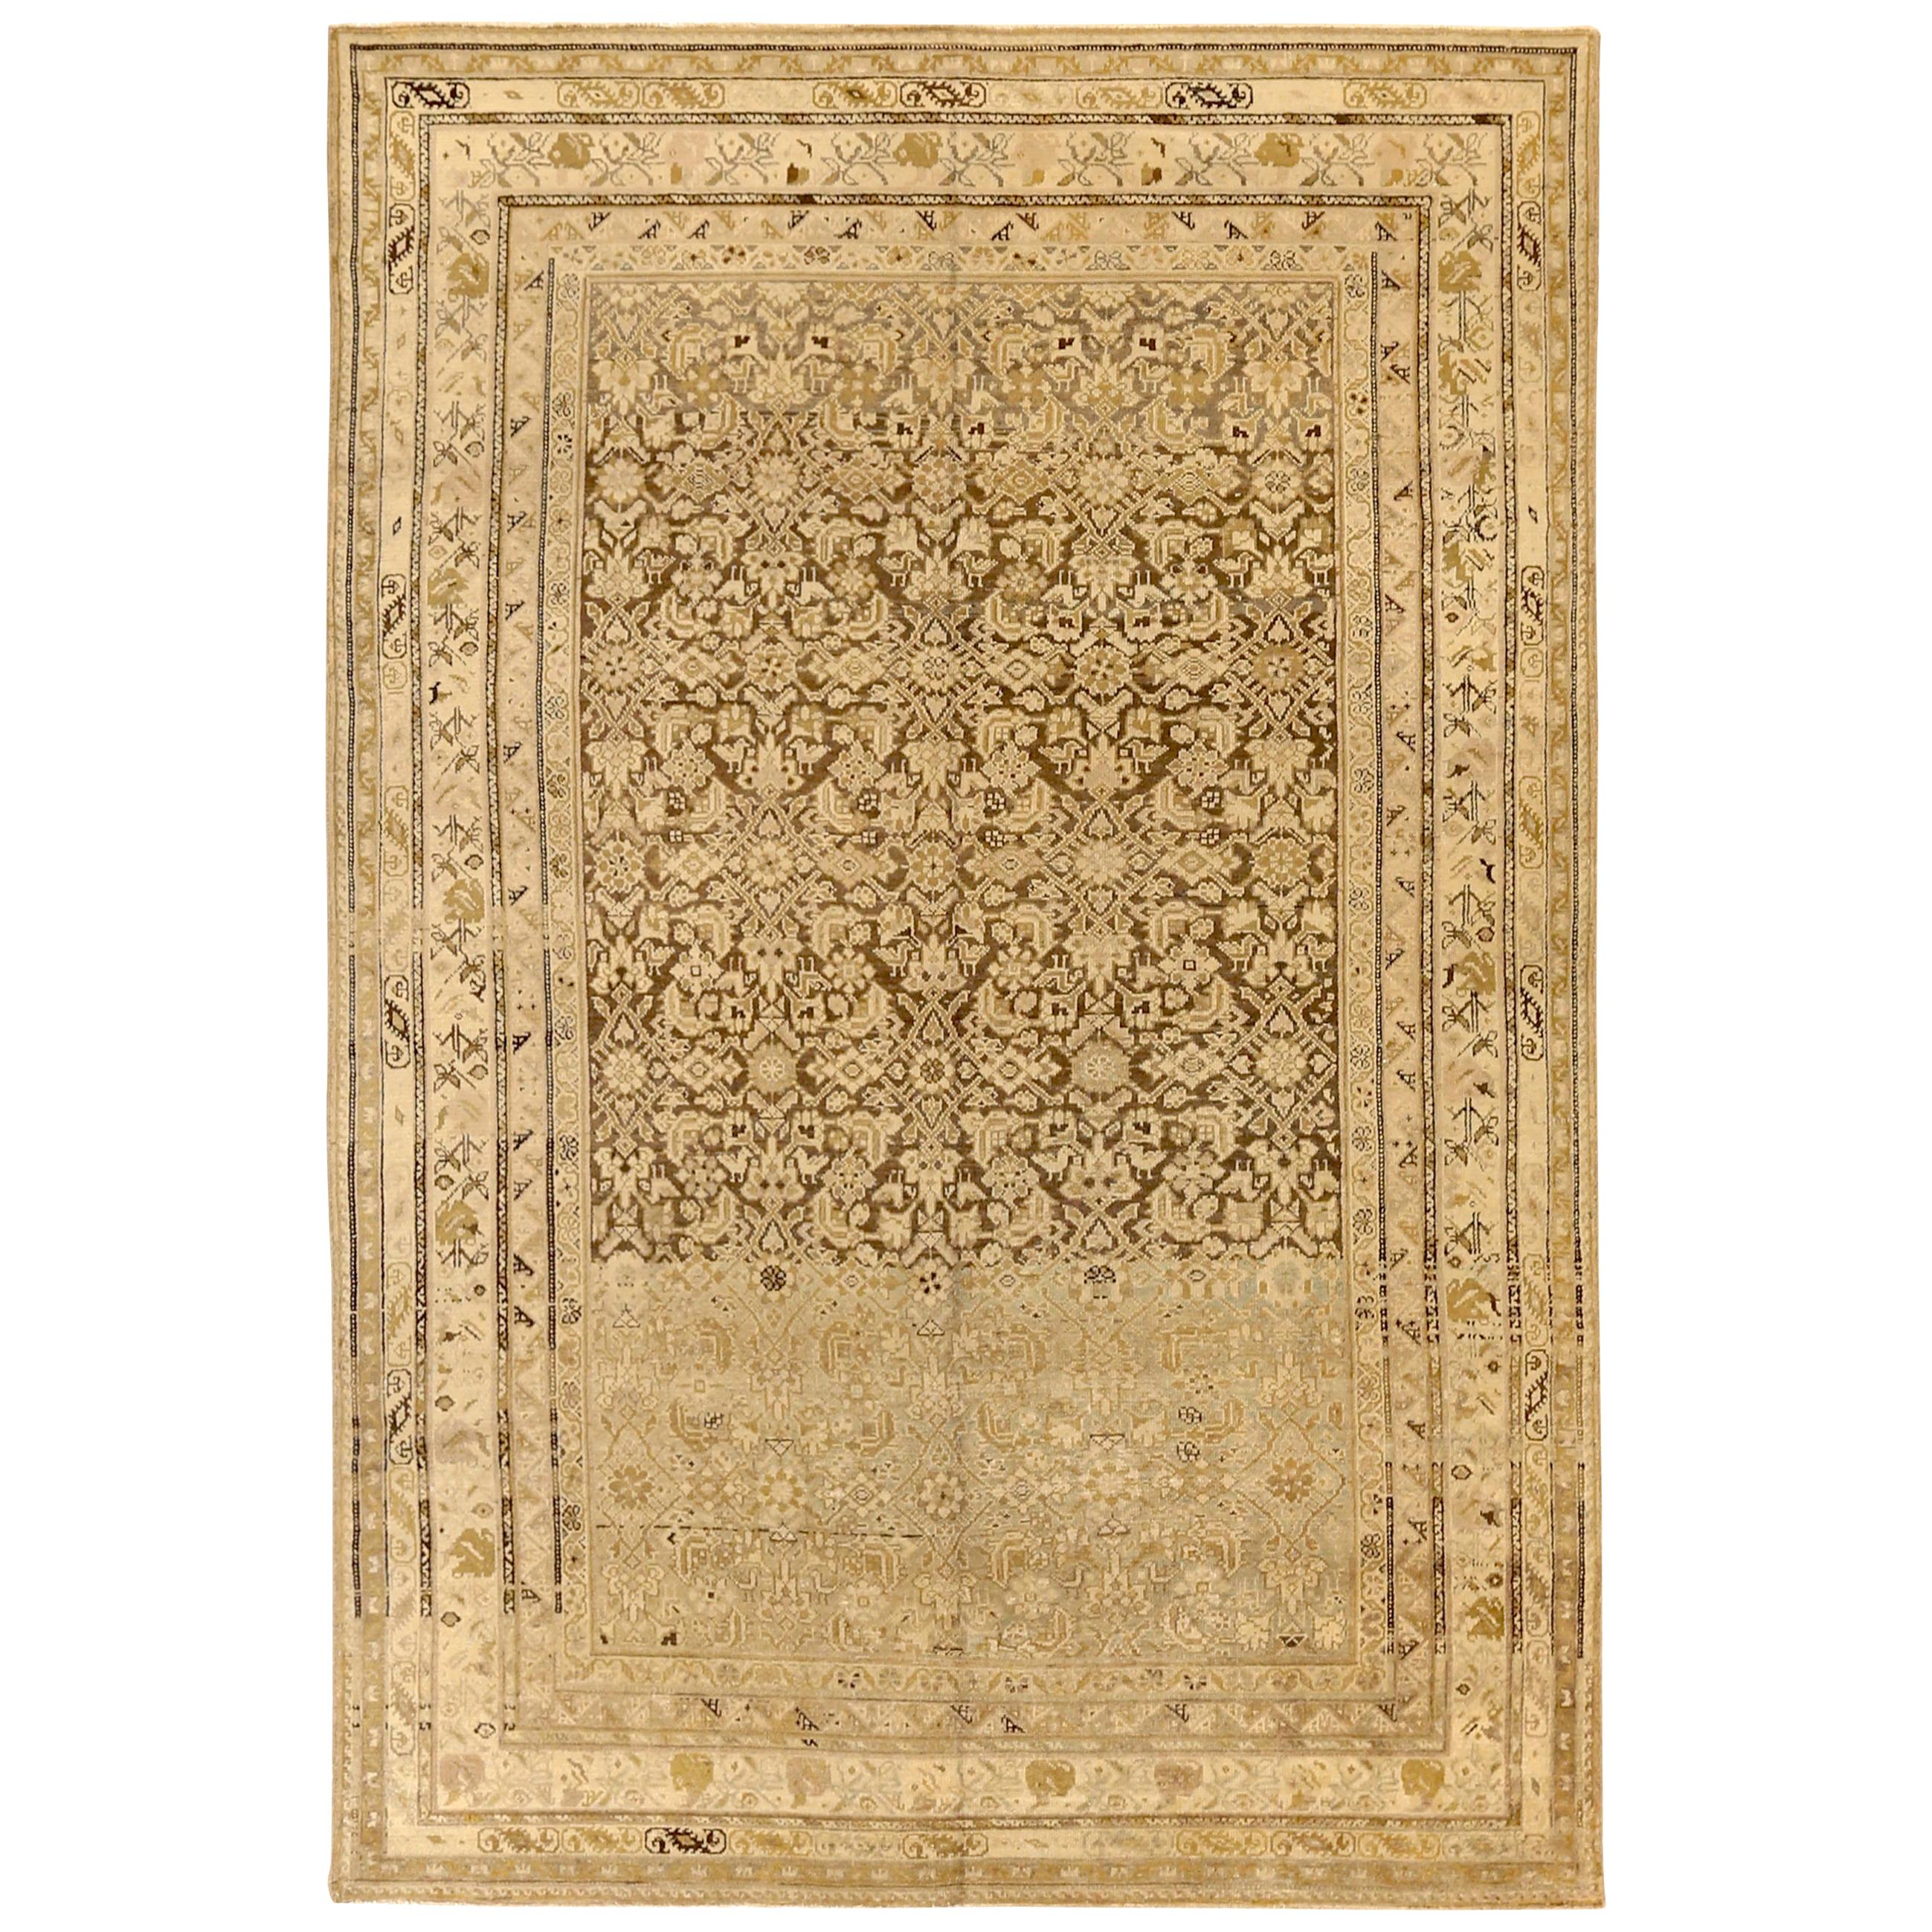 Antique Persian Malayer Rug with Floral Patterns on Ivory Field